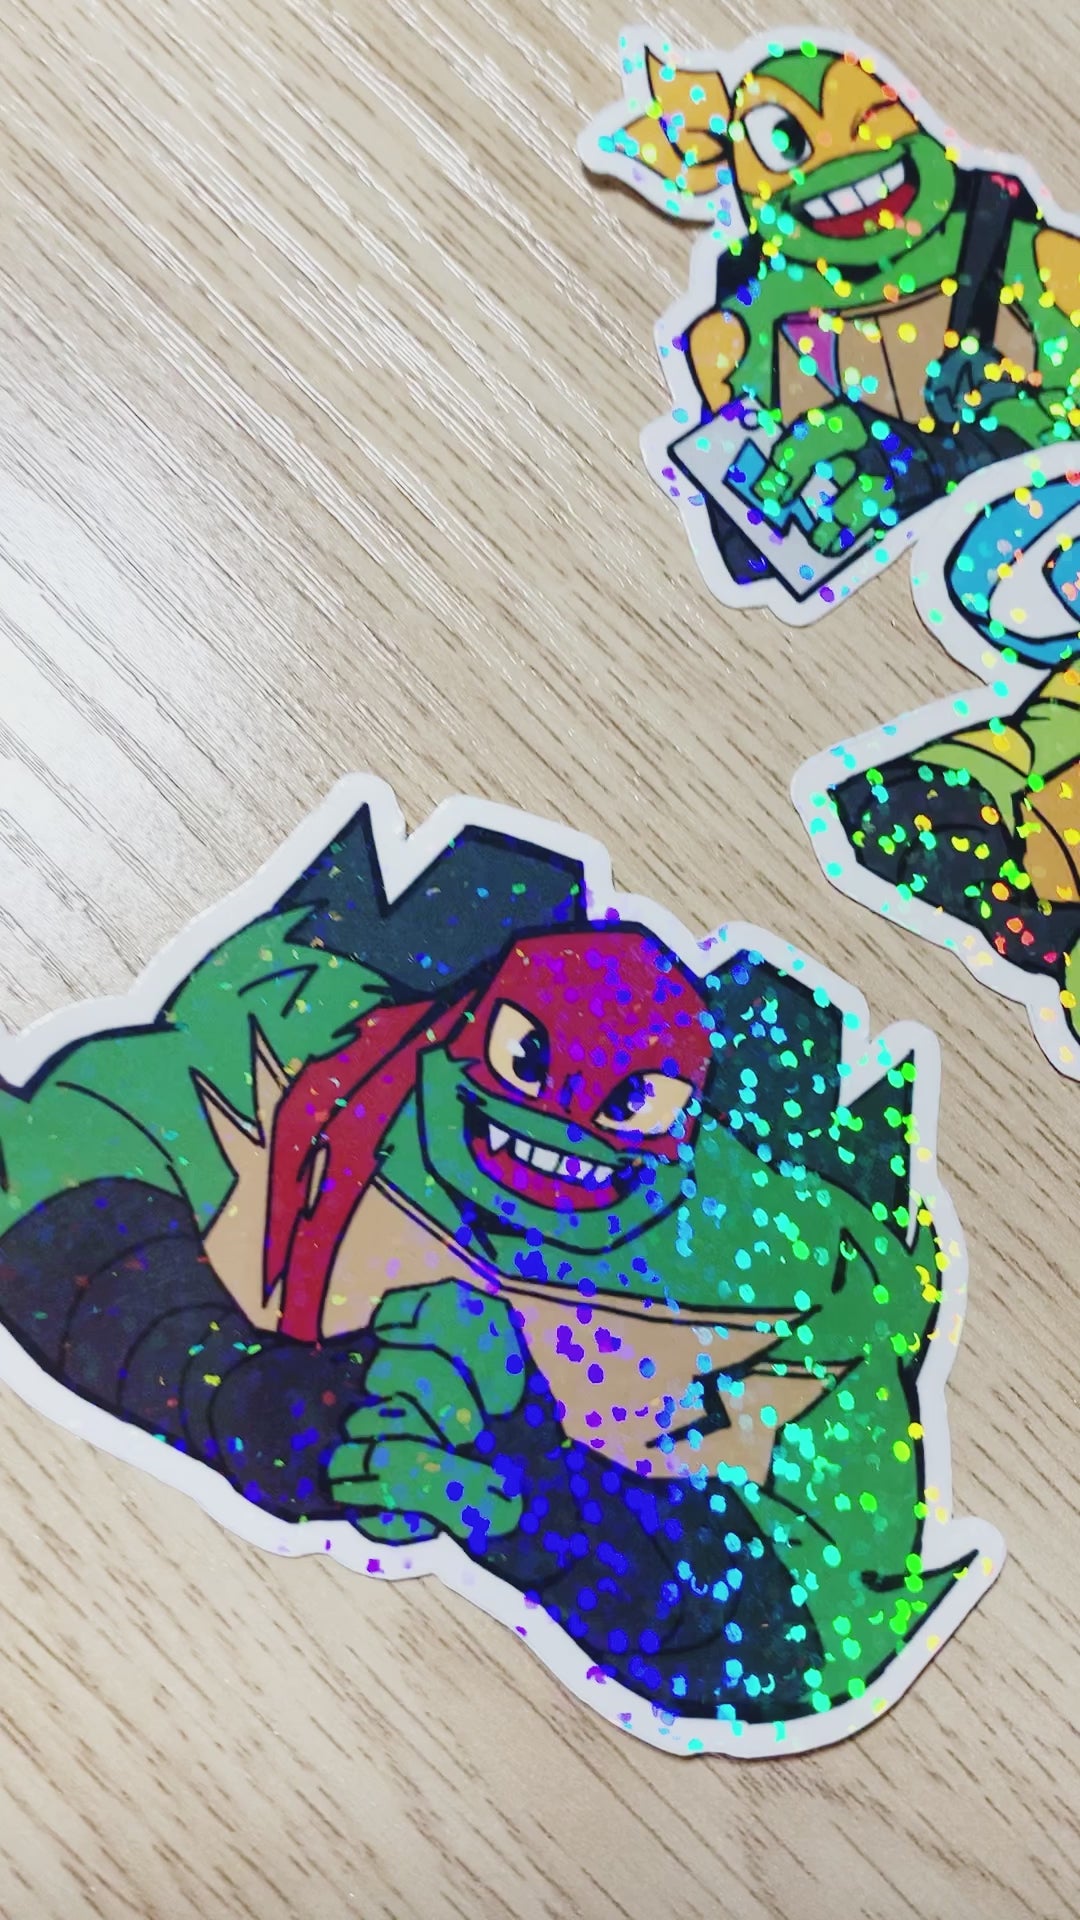 Sticker making and printing serves